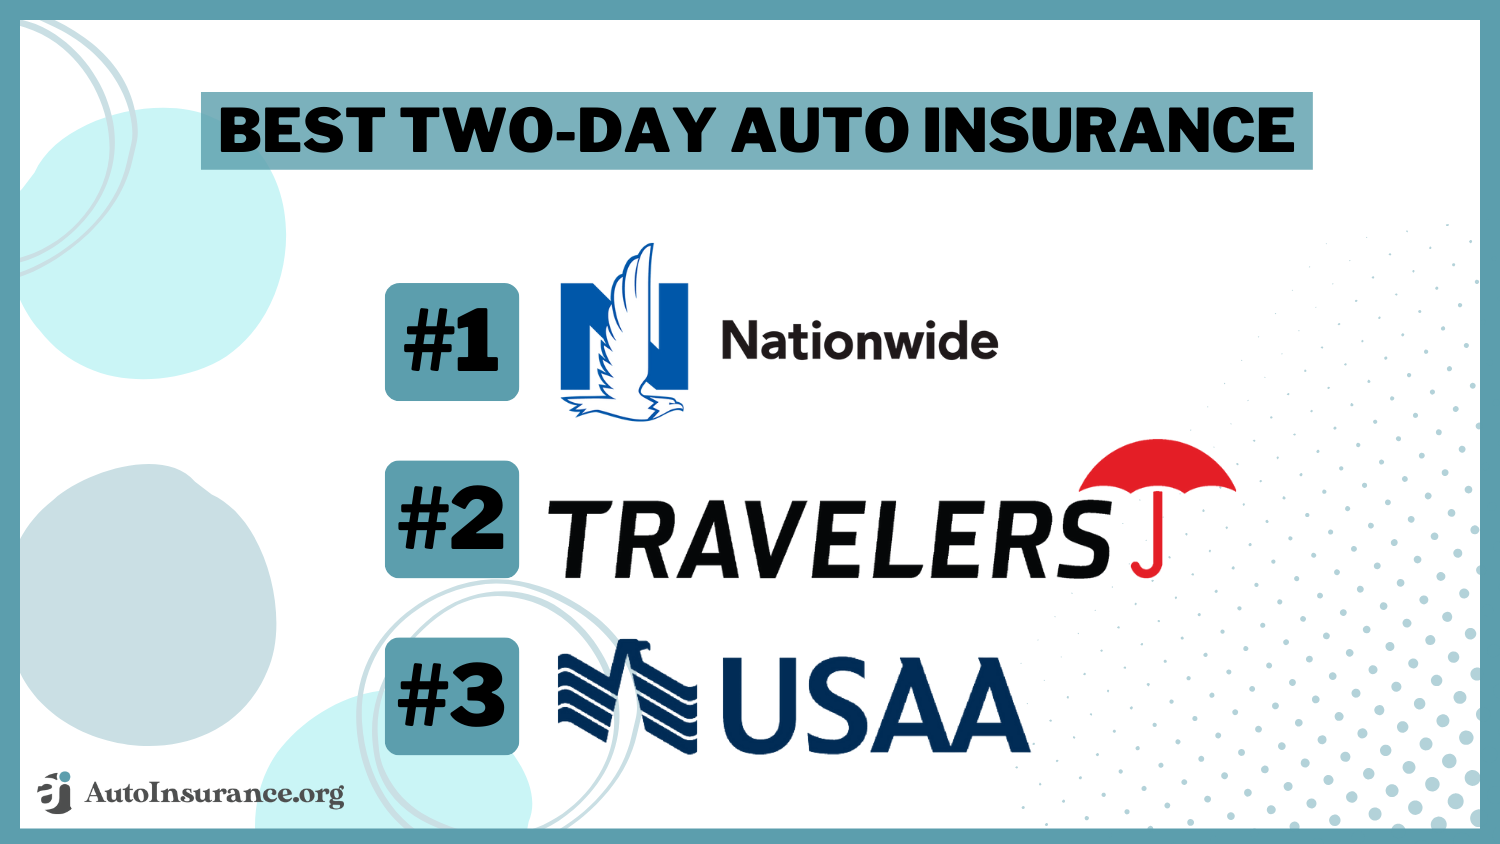 Nationwide, Travelers, USAA: Best Two-Day Auto Insurance 